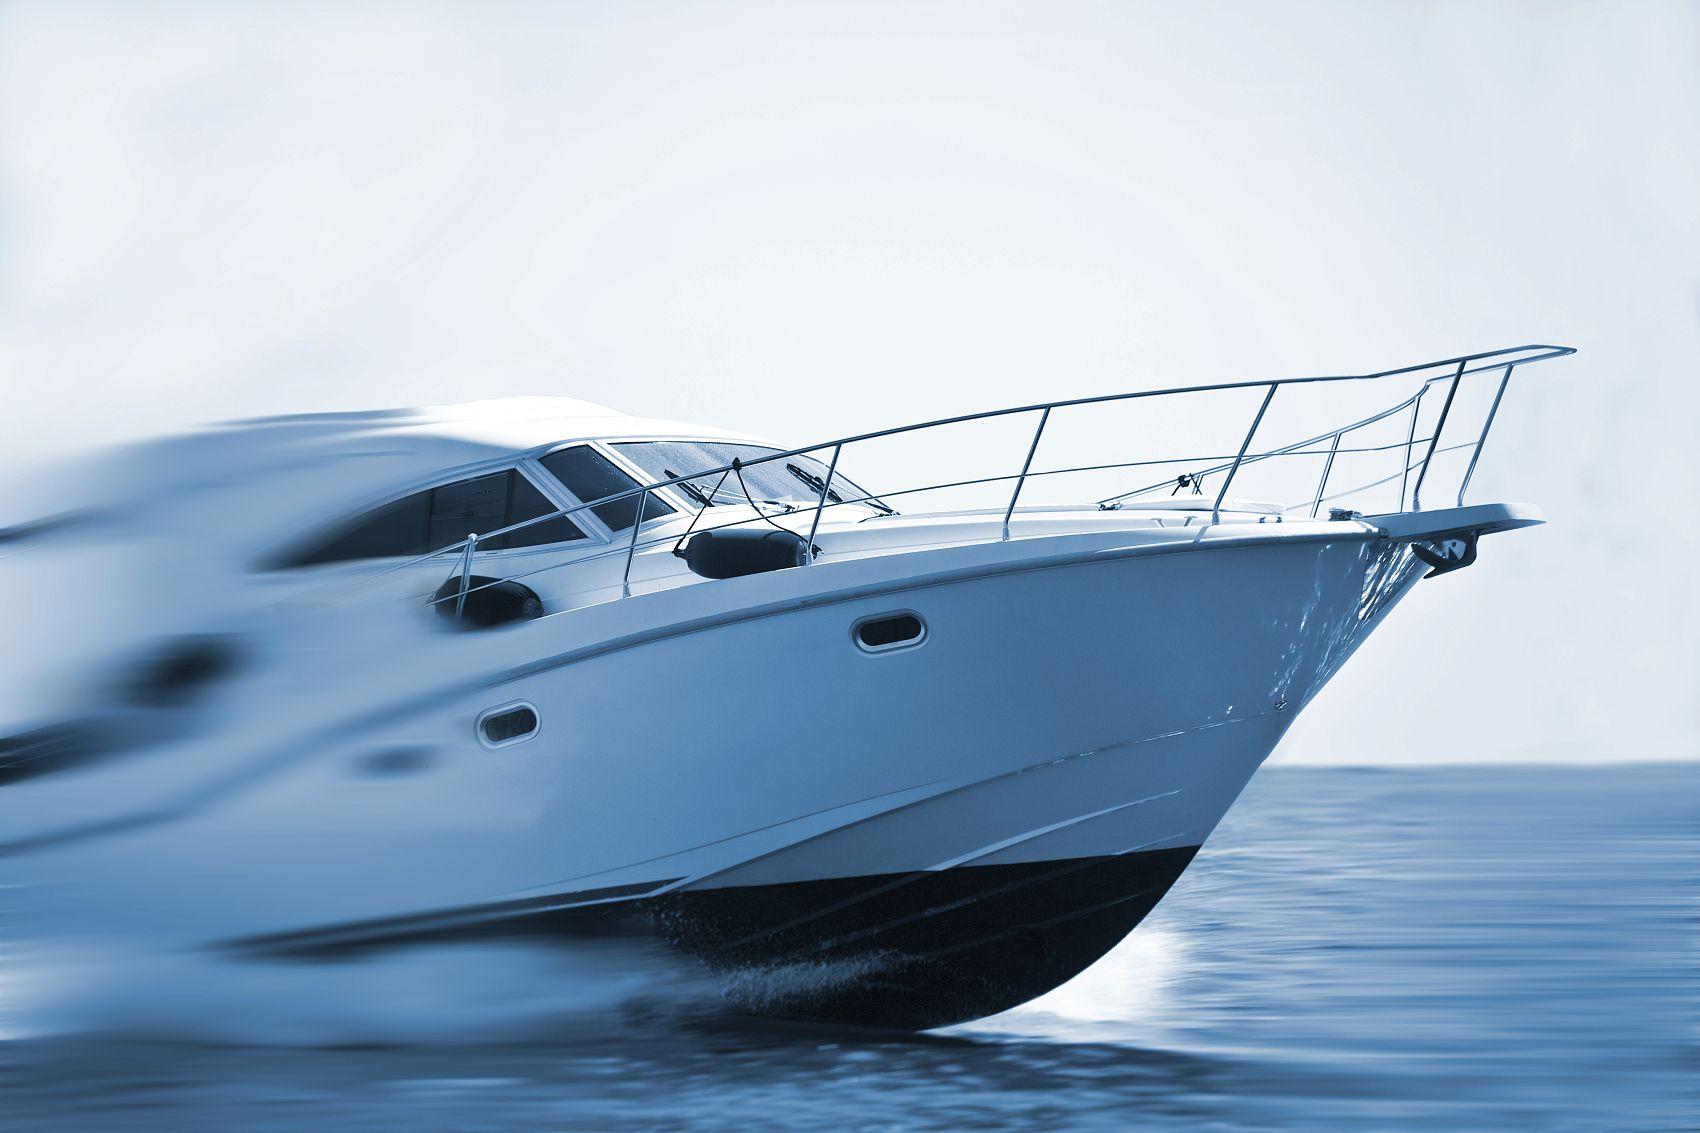 Product MS SPEED BOAT—Let you have an extraordinary experience at sea - MS Aluminium boat image